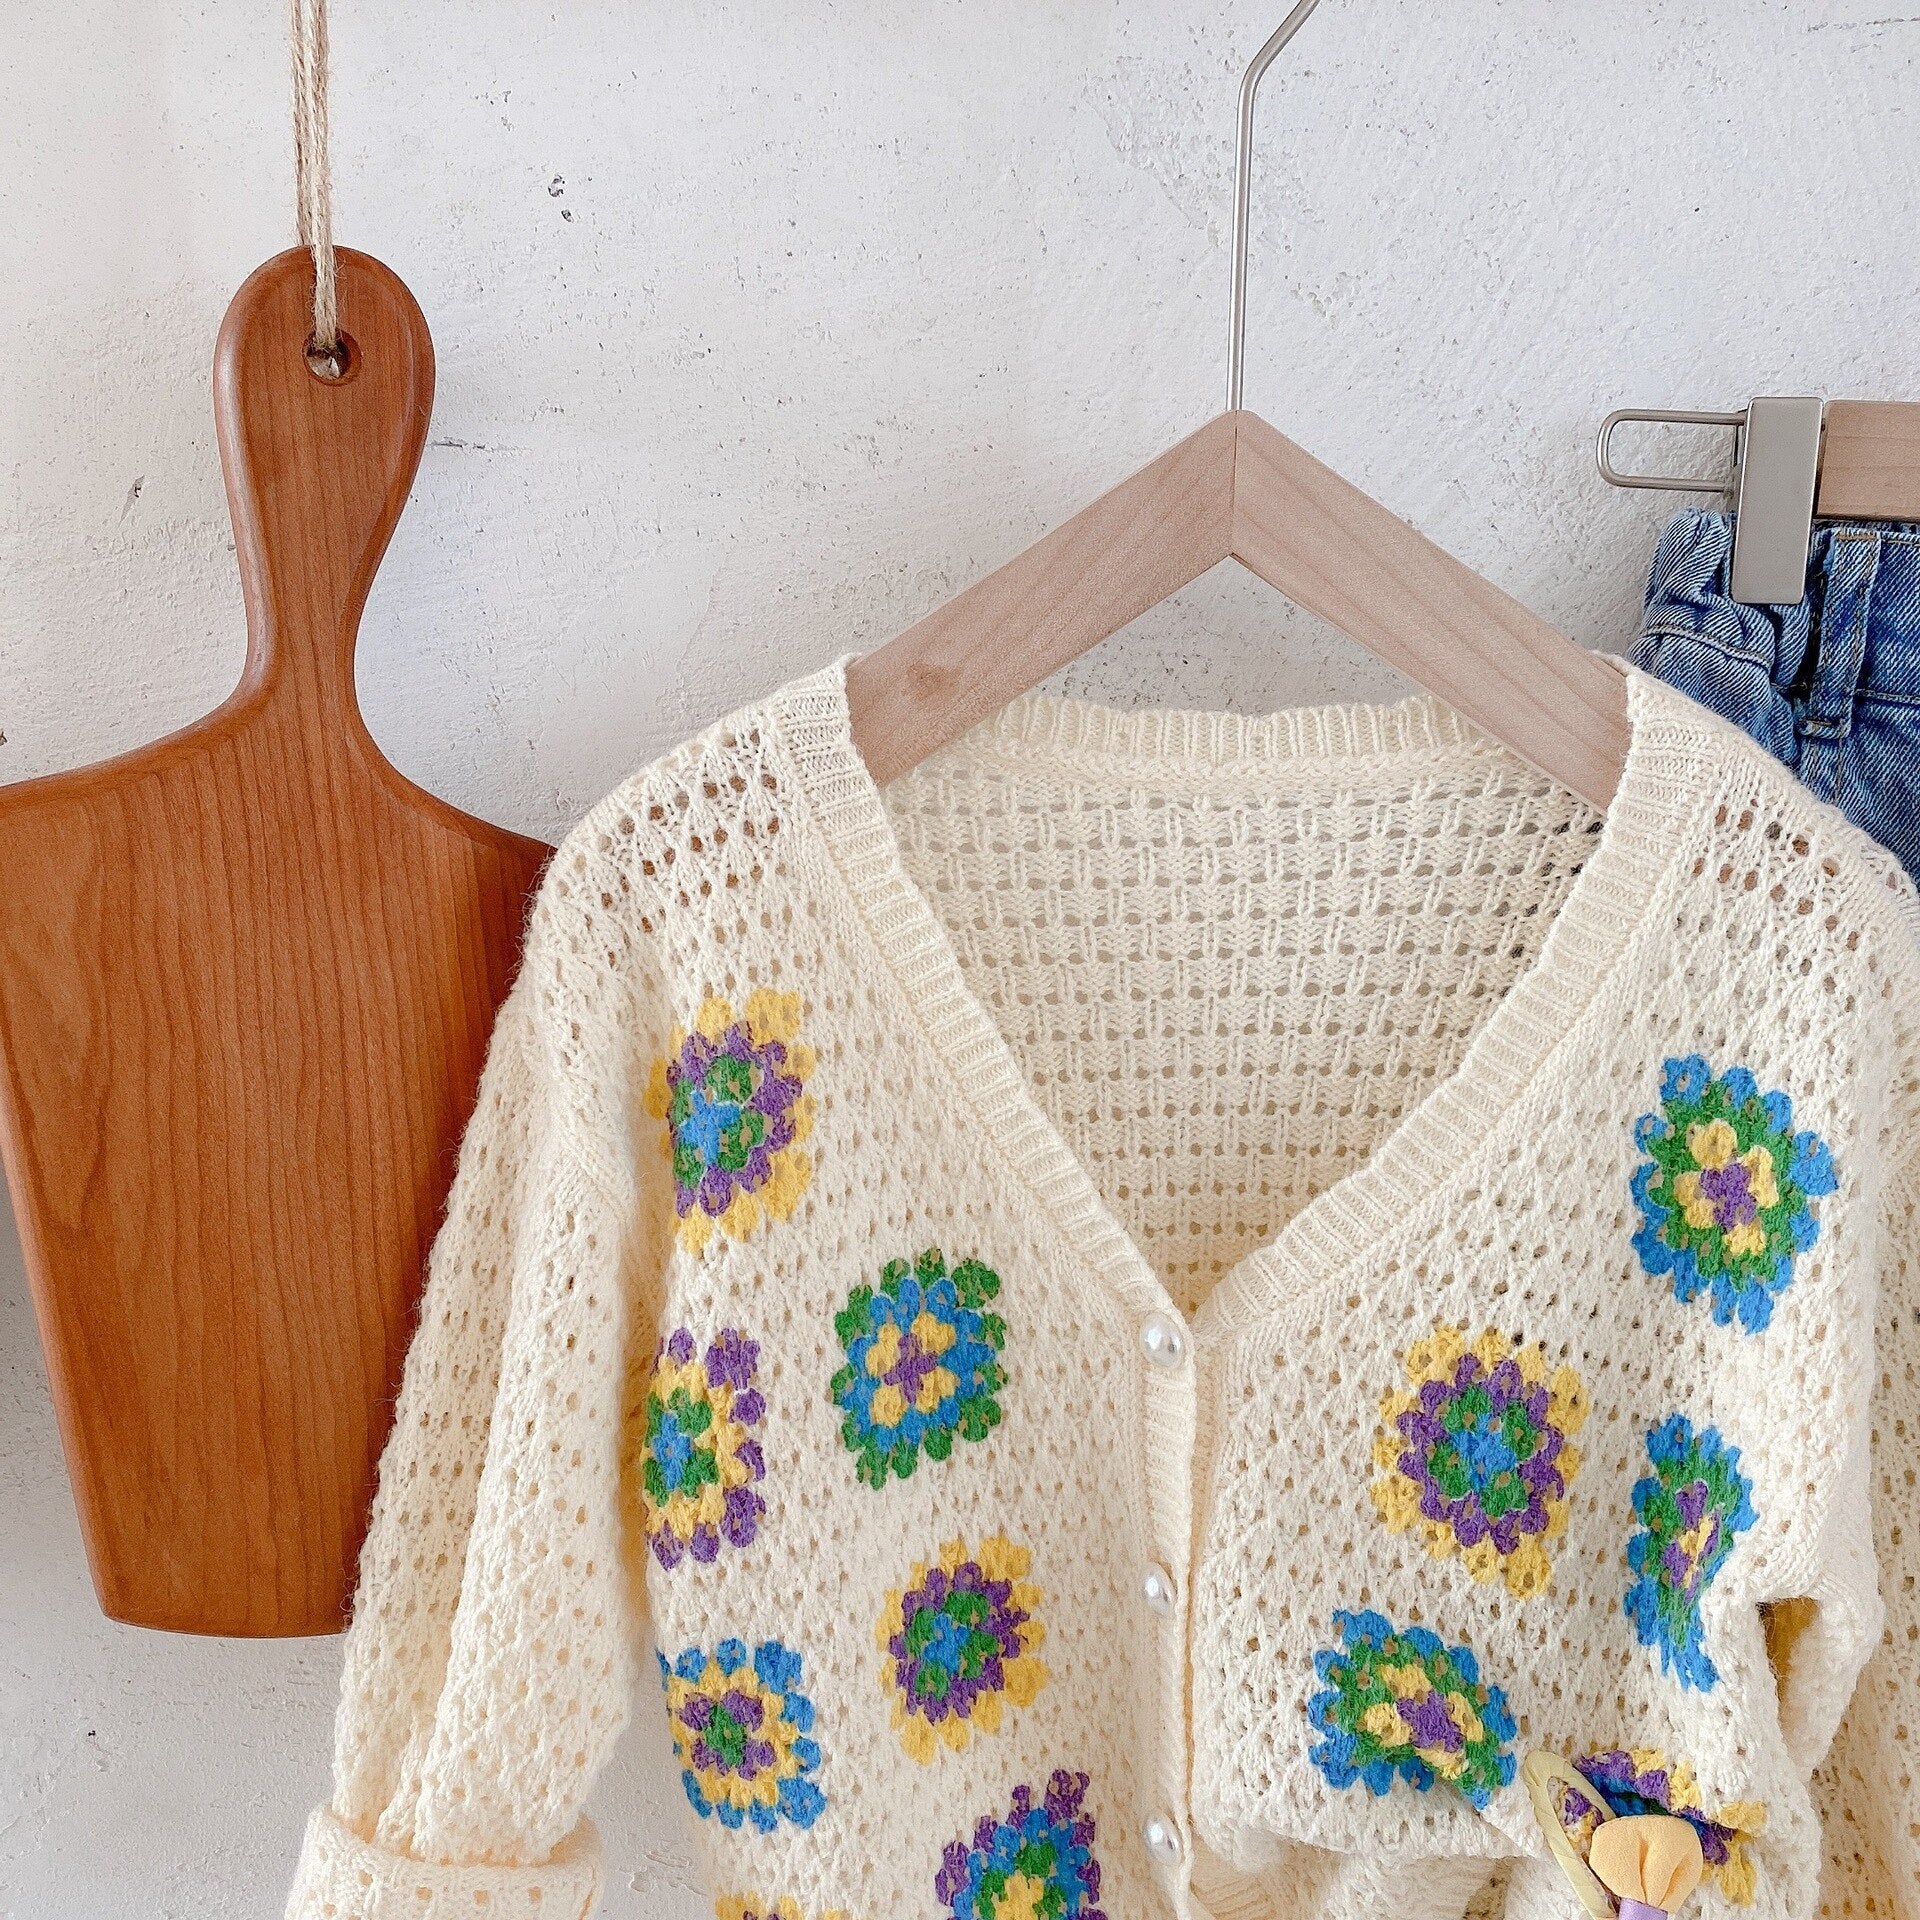 White Hollow Knit Patterned Cardigan - JAC